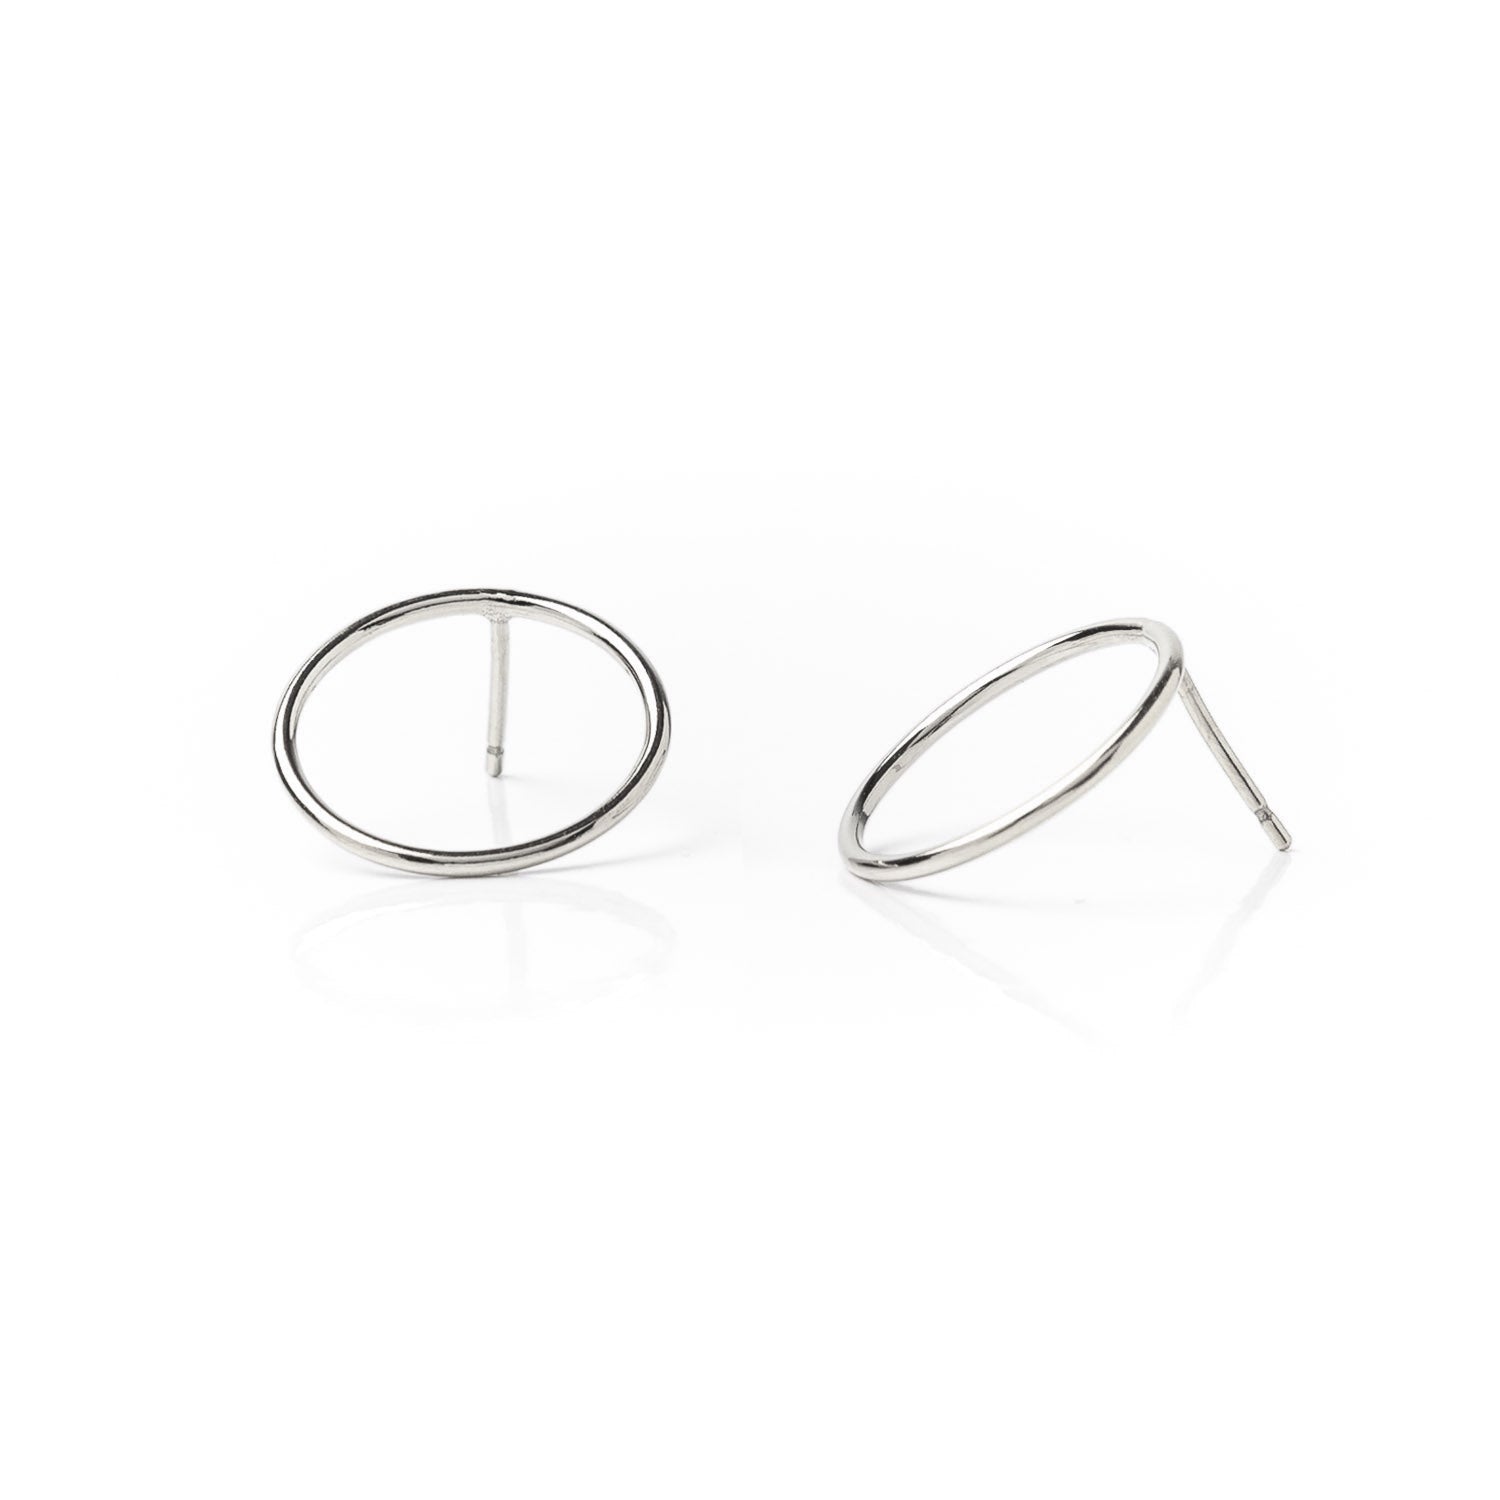 New Moon Studs: Silver